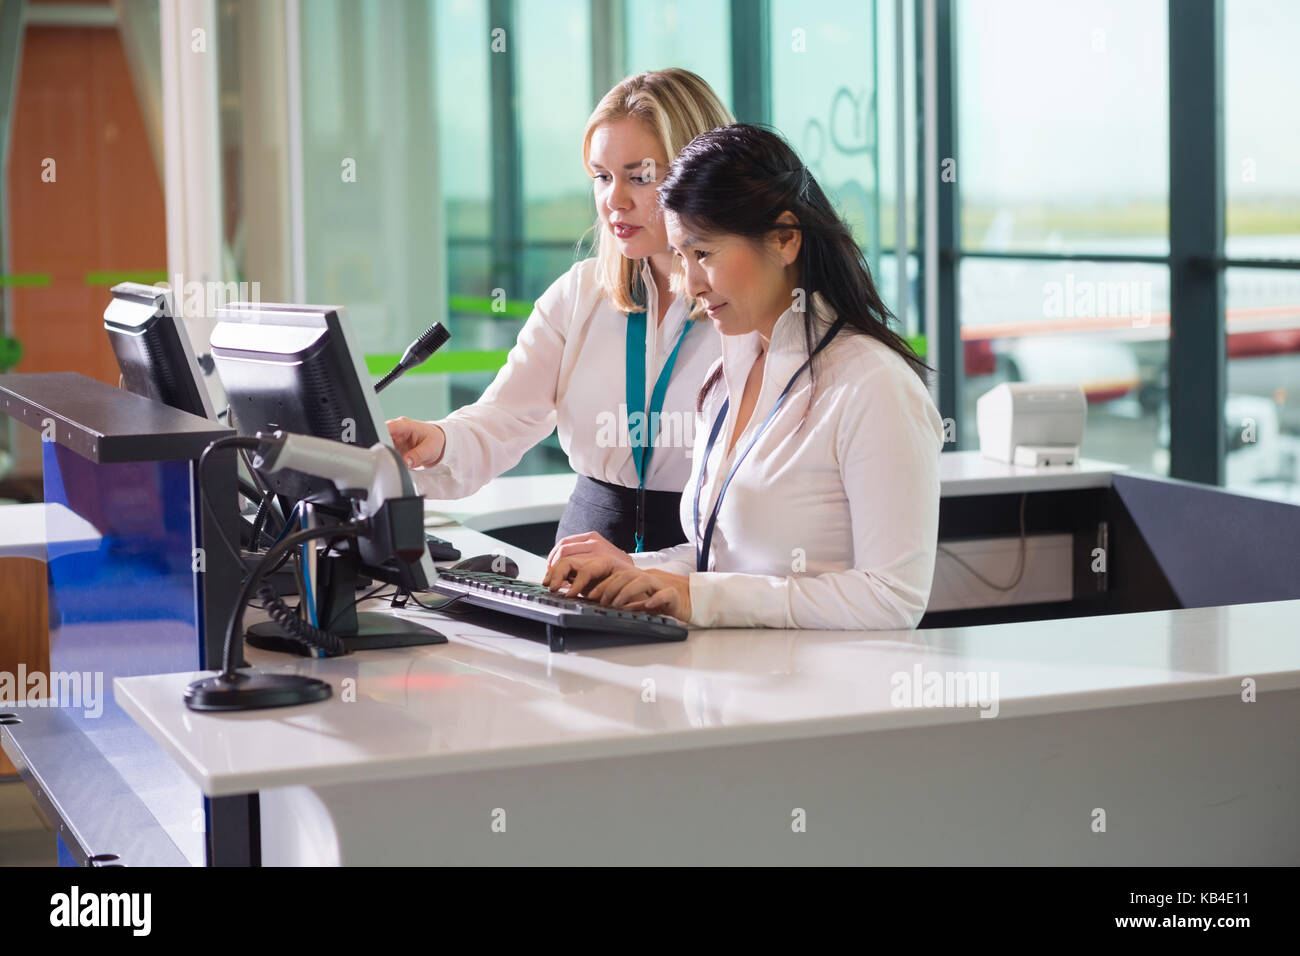 Multiethnic female ground staff using computer at counter in airport Stock Photo